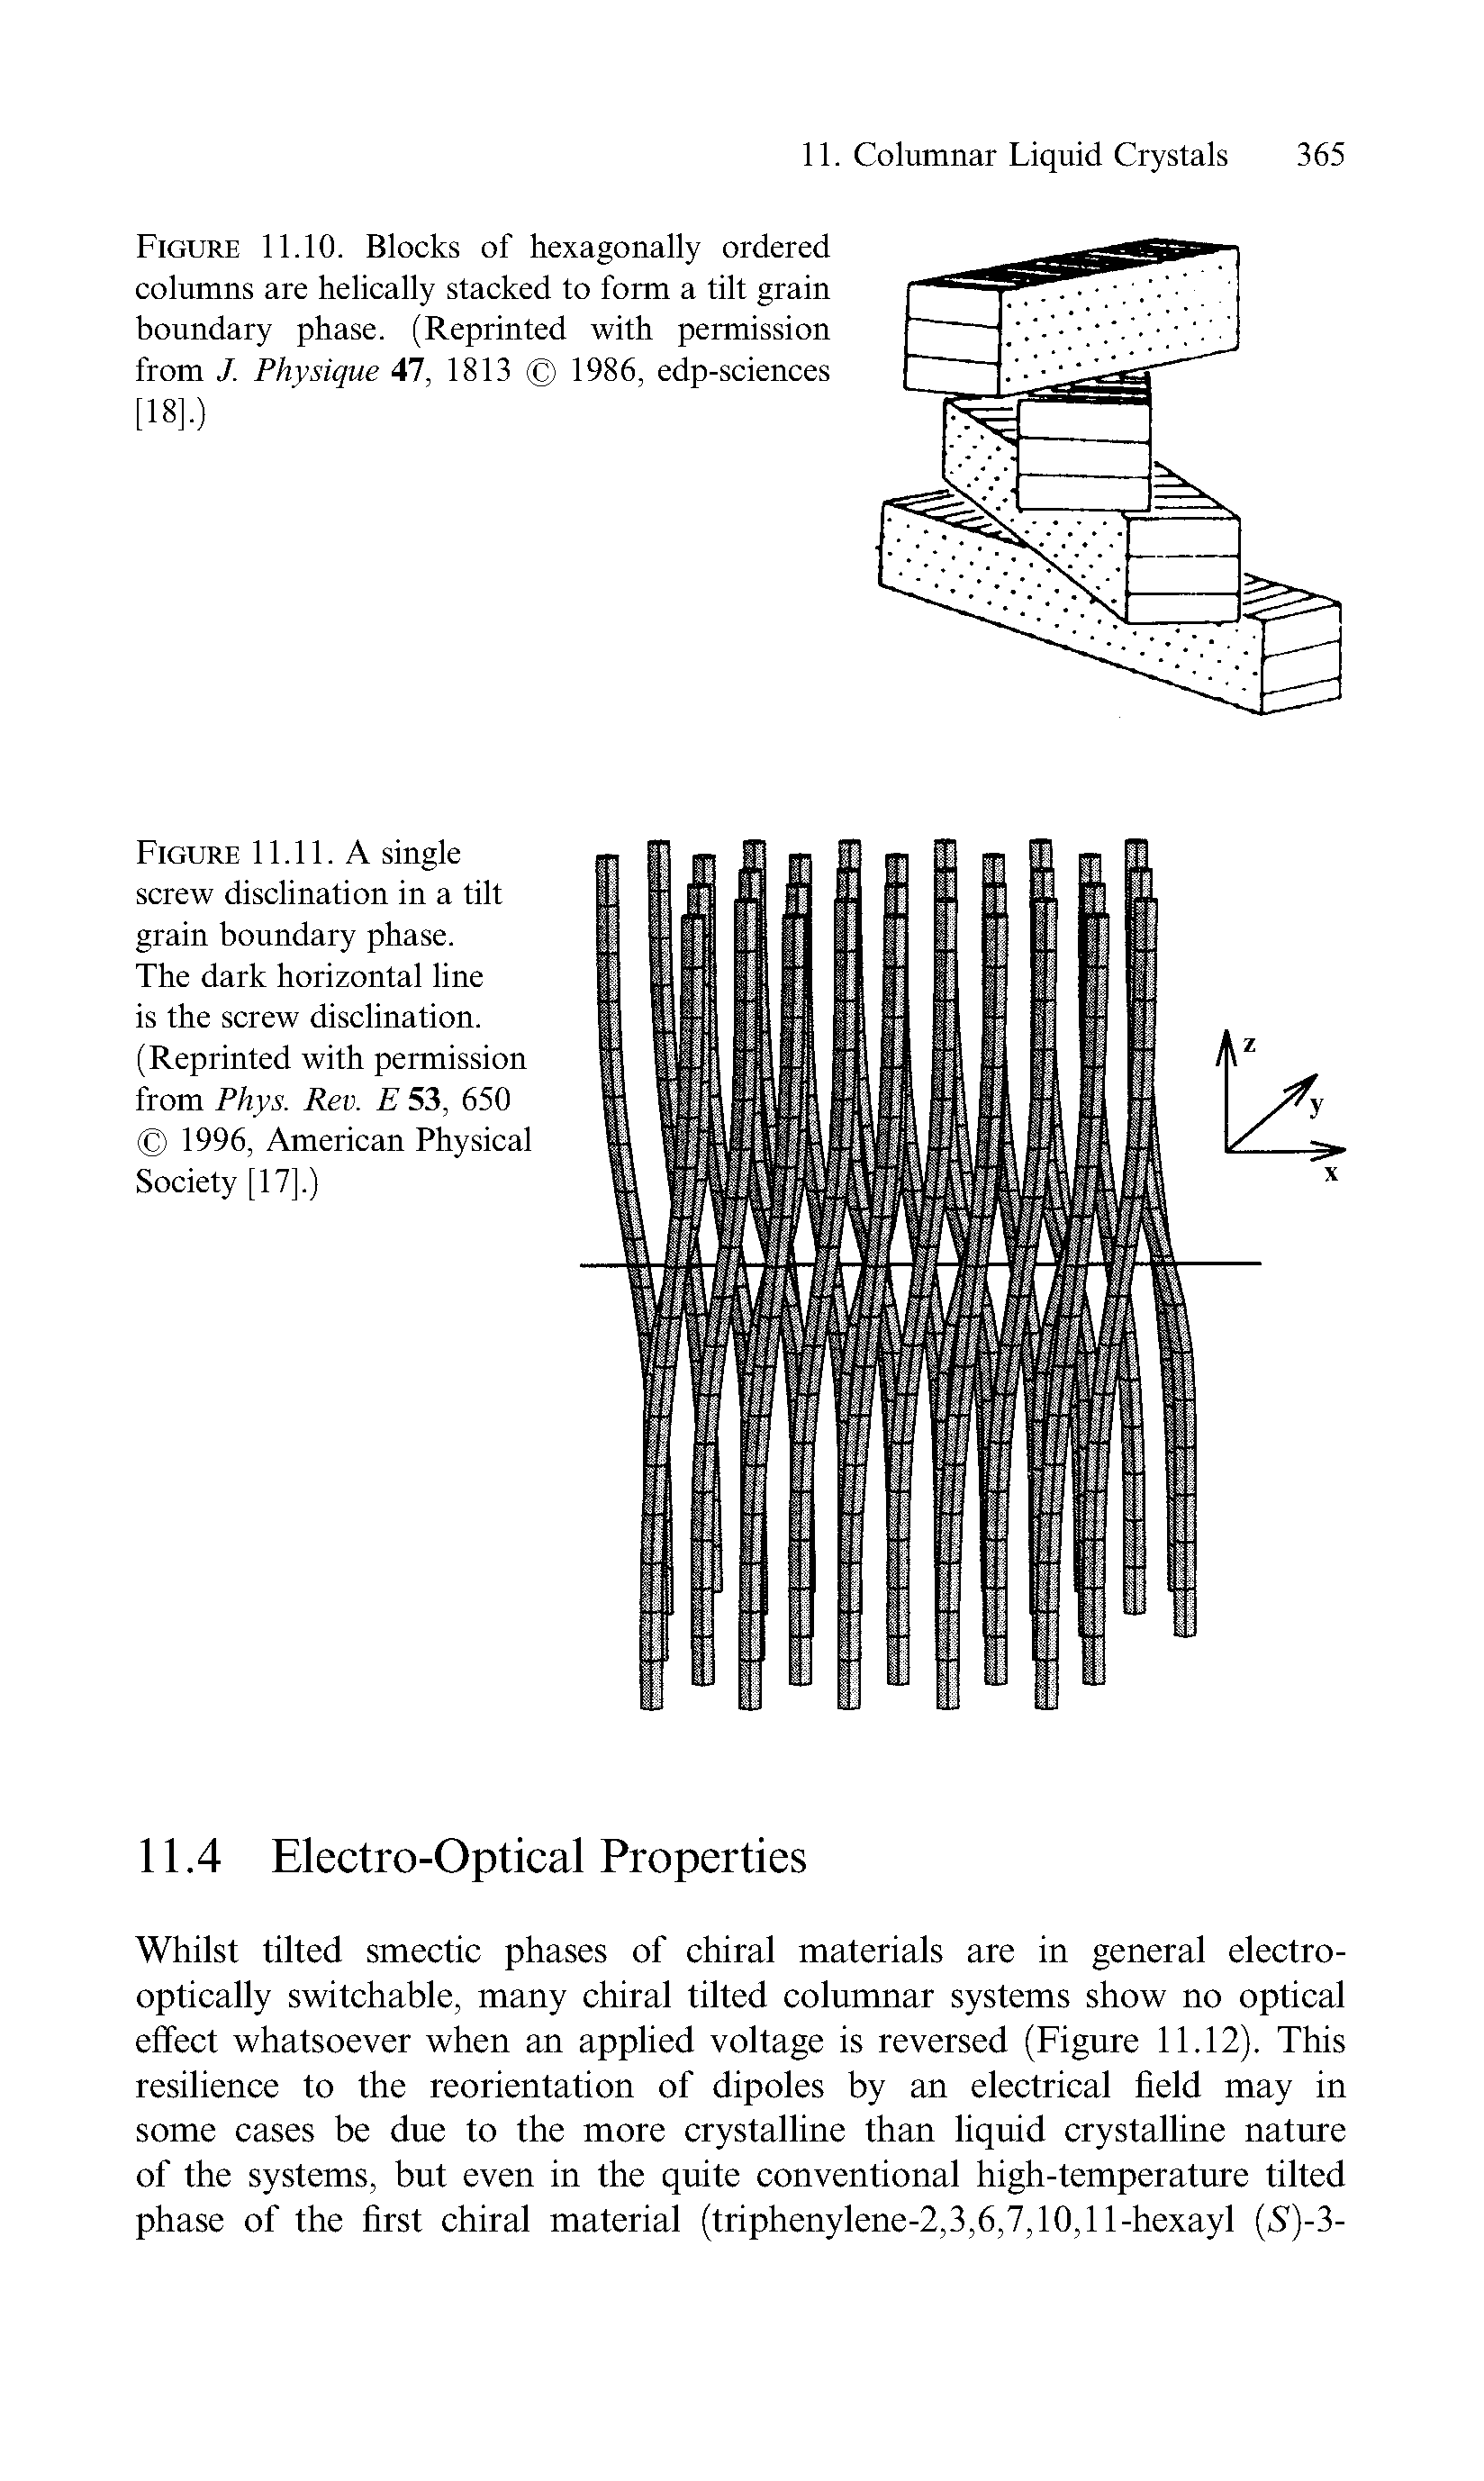 Figure 11.10. Blocks of hexagonally ordered columns are helically stacked to form a tilt grain boundary phase. (Reprinted with permission from J. Physique 47, 1813 1986, edp-sciences [18].)...